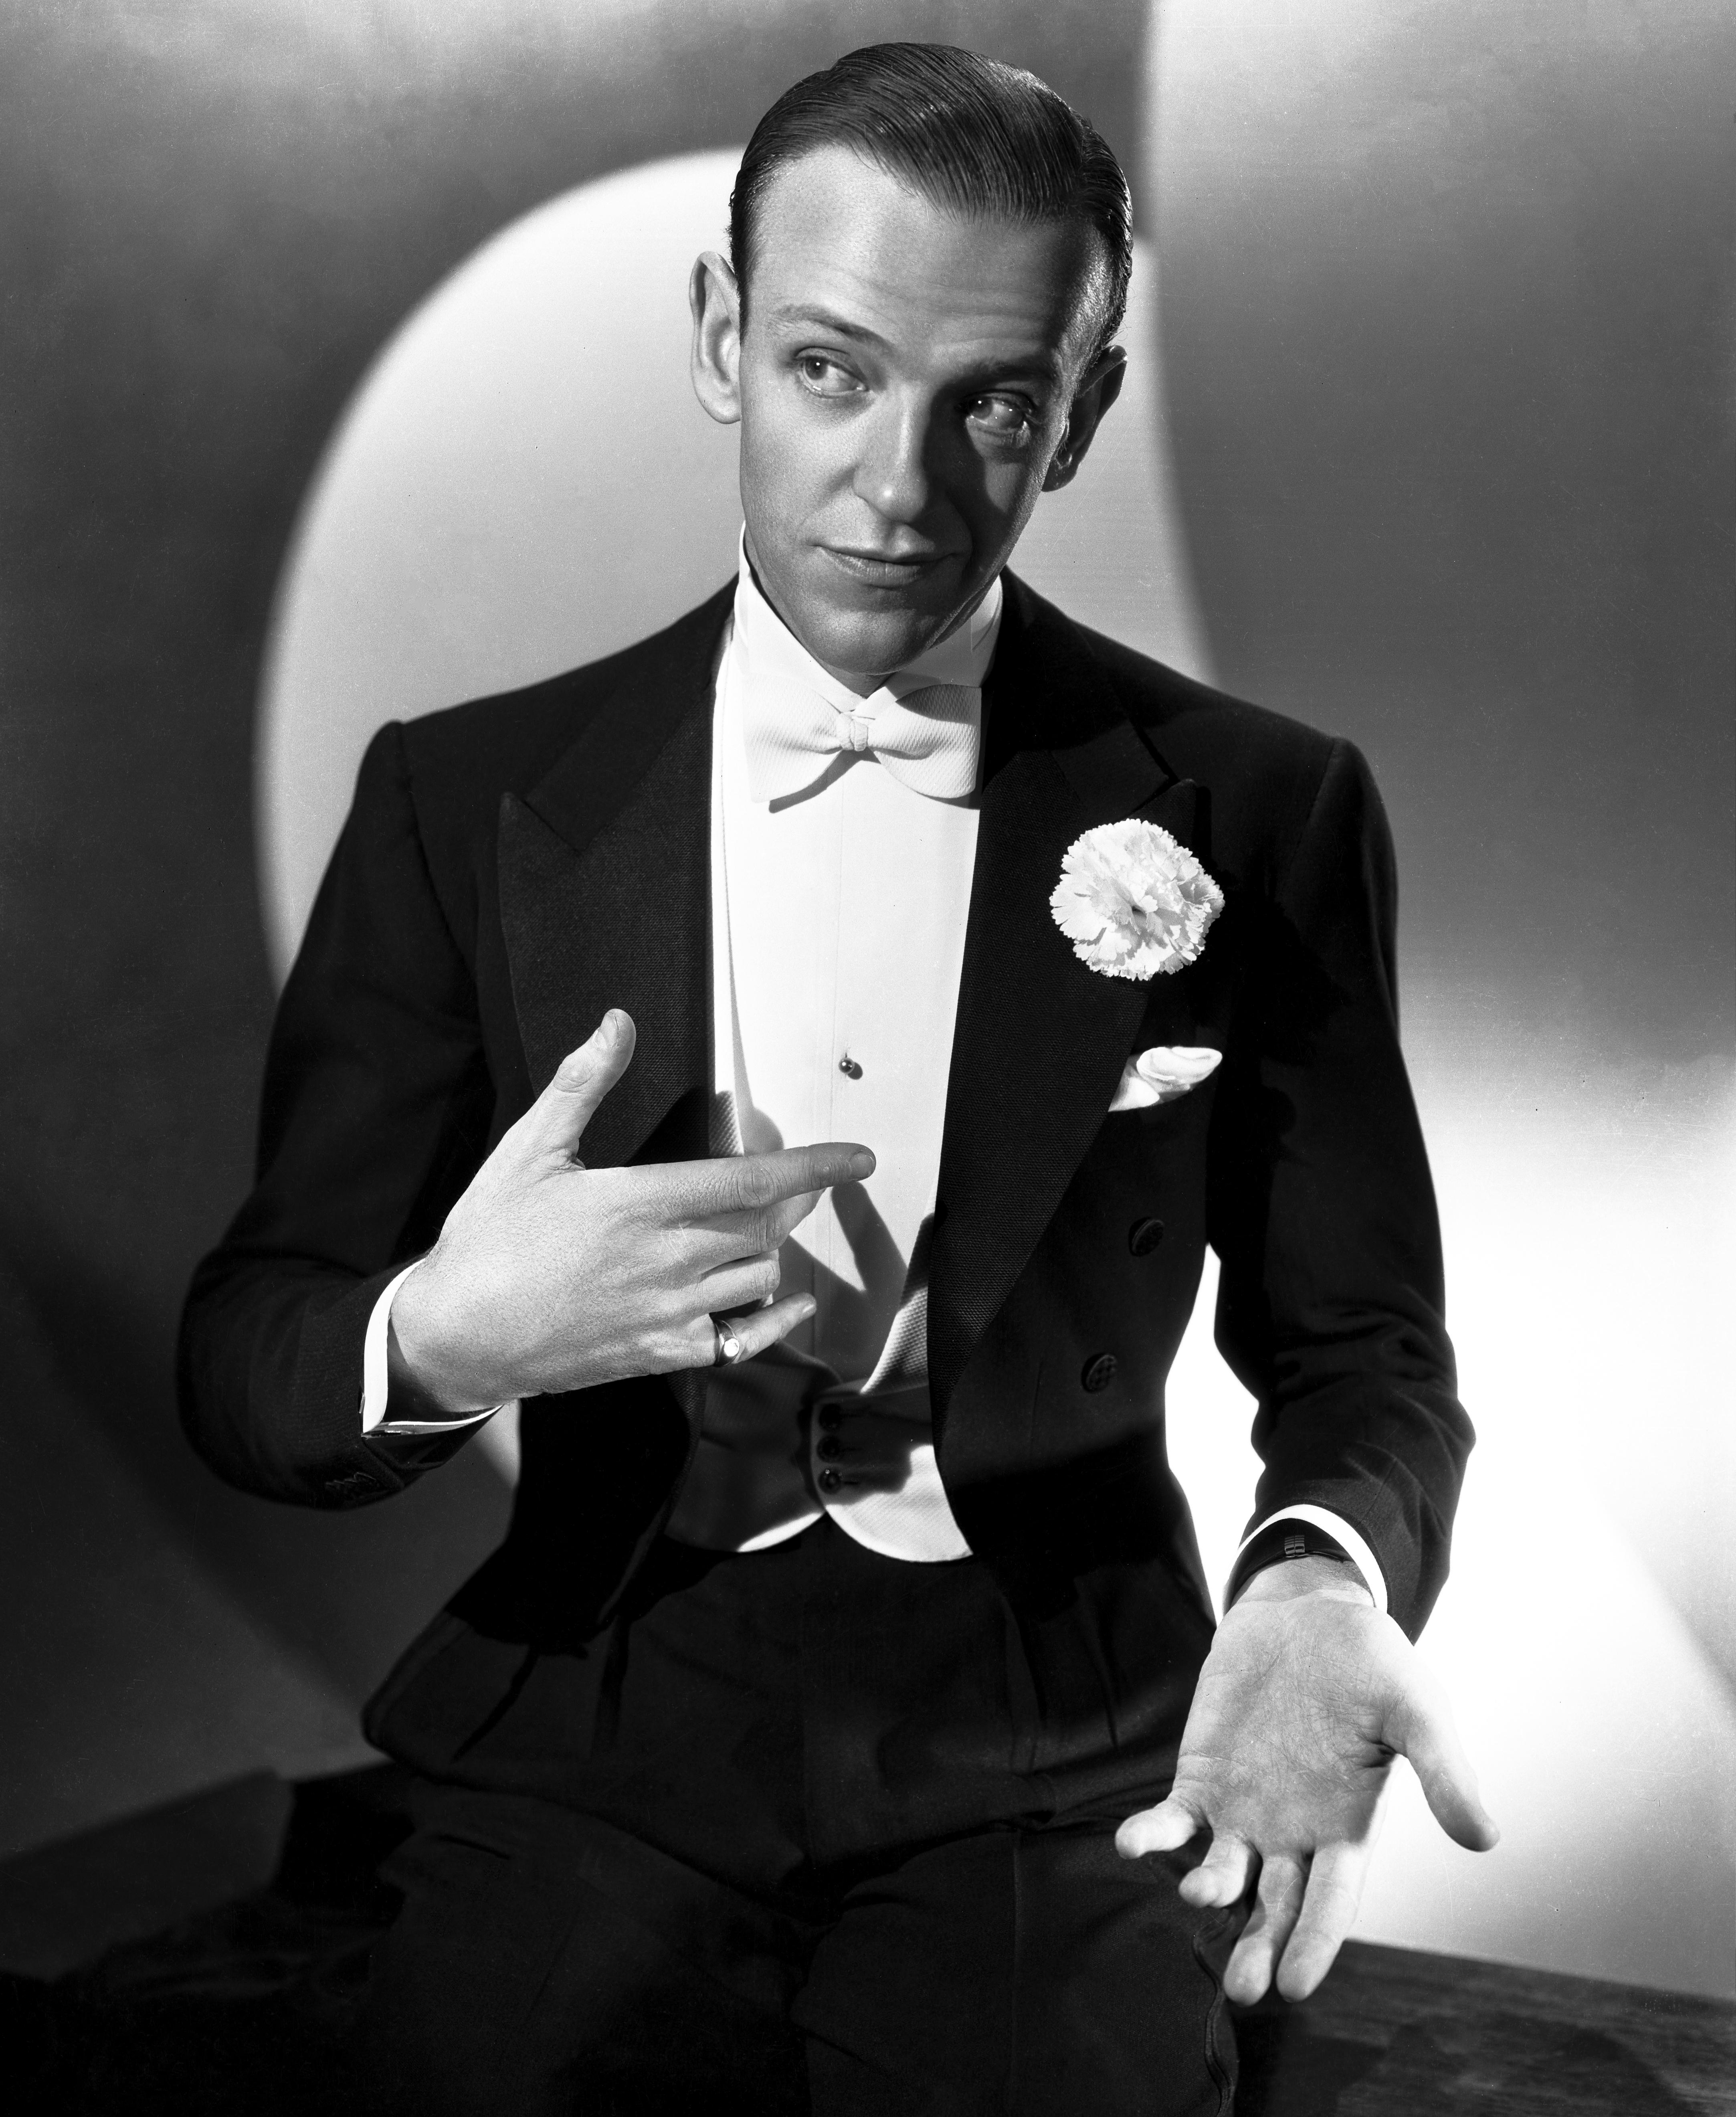 Ernest Bachrach Black and White Photograph - Fred Astaire in Formal Attire Fine Art Print